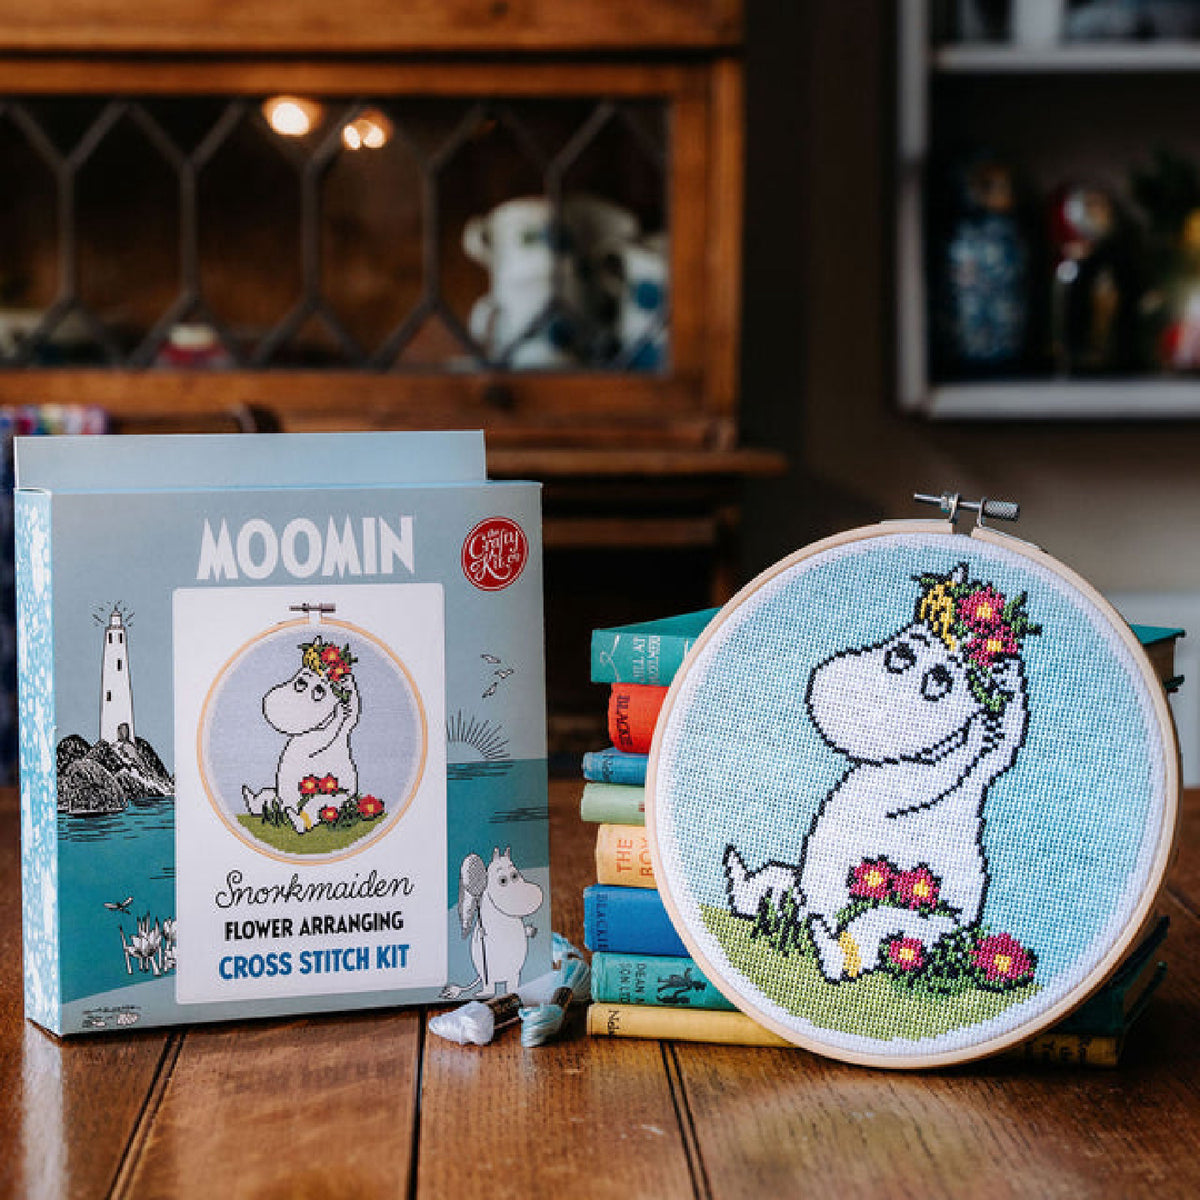 Moomin Cross Stitch Kit Snorkmaiden With A flower Crown